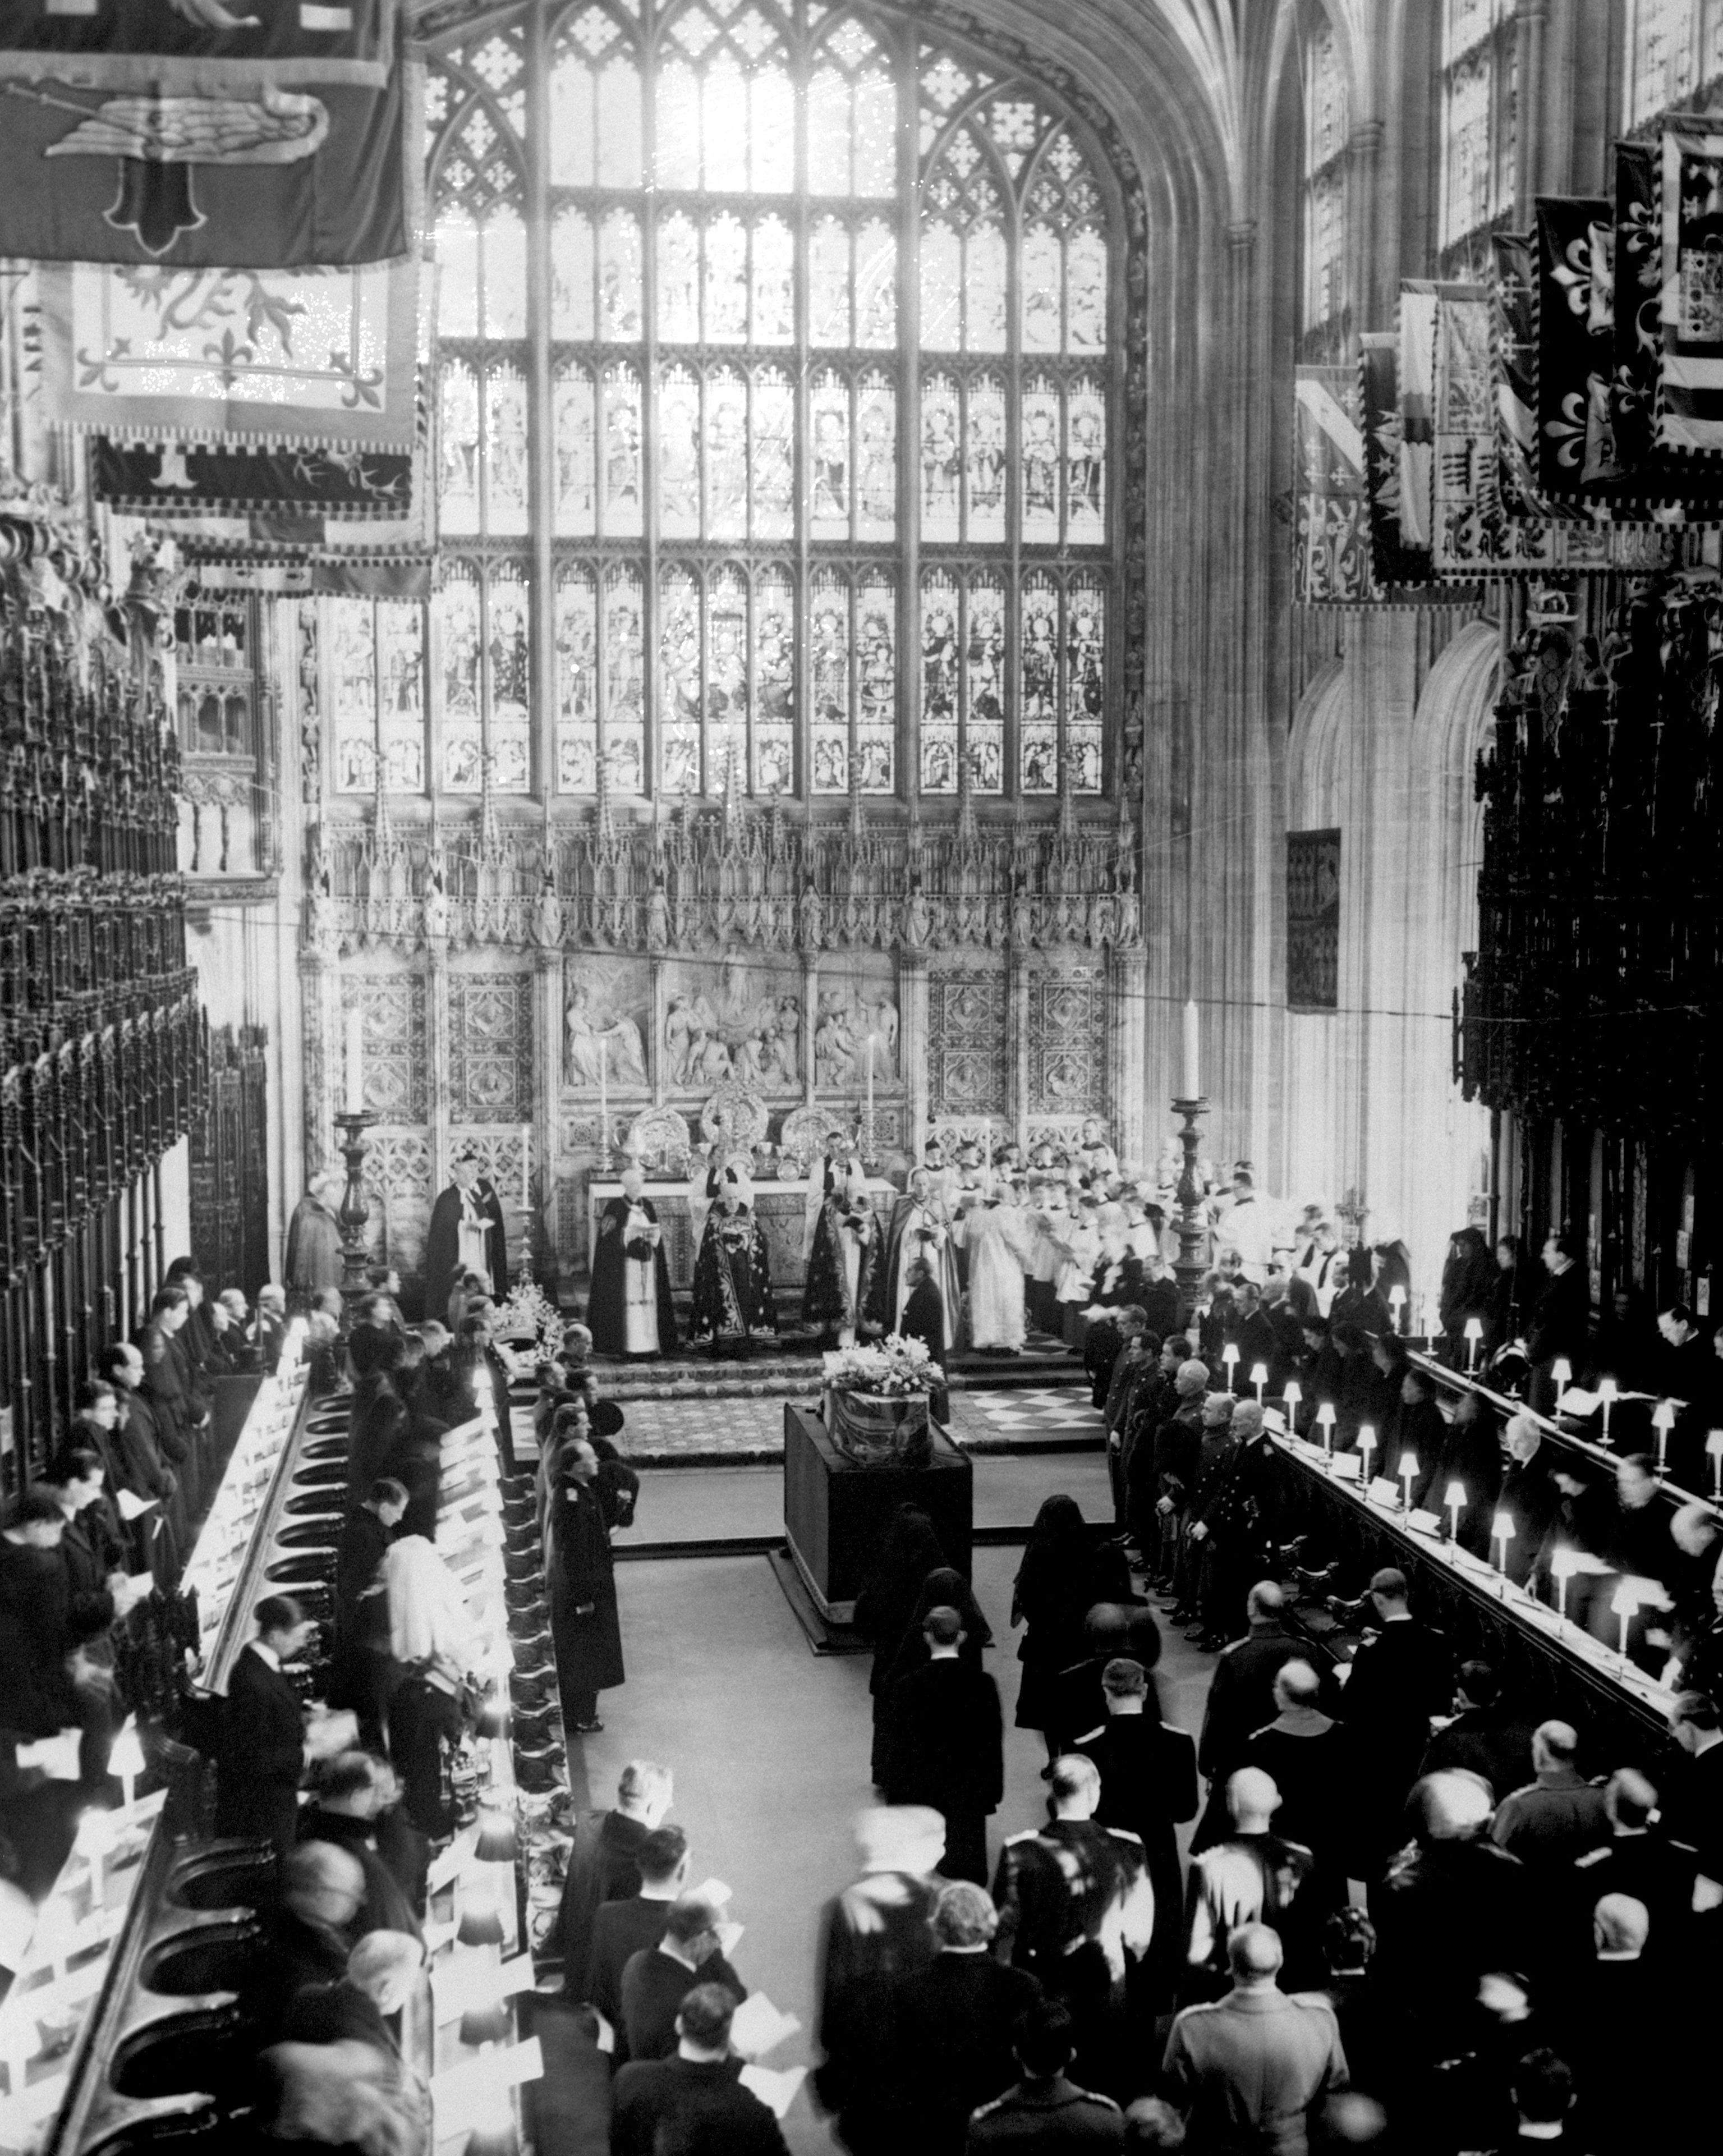 <p>This photo was taken during the funeral of King George VI at St. George's Chapel at Windsor Castle on Feb. 15, 1952. In front of the altar is the Archbishop of Canterbury, Dr. Geoffrey Fisher. </p><p>Immediately behind the late monarch's coffin are the heavily veiled Queen Elizabeth II, Queen Elizabeth the Queen Mother, Princess Margaret and the Princes Royal, King George VI's sister Princess Mary. </p>